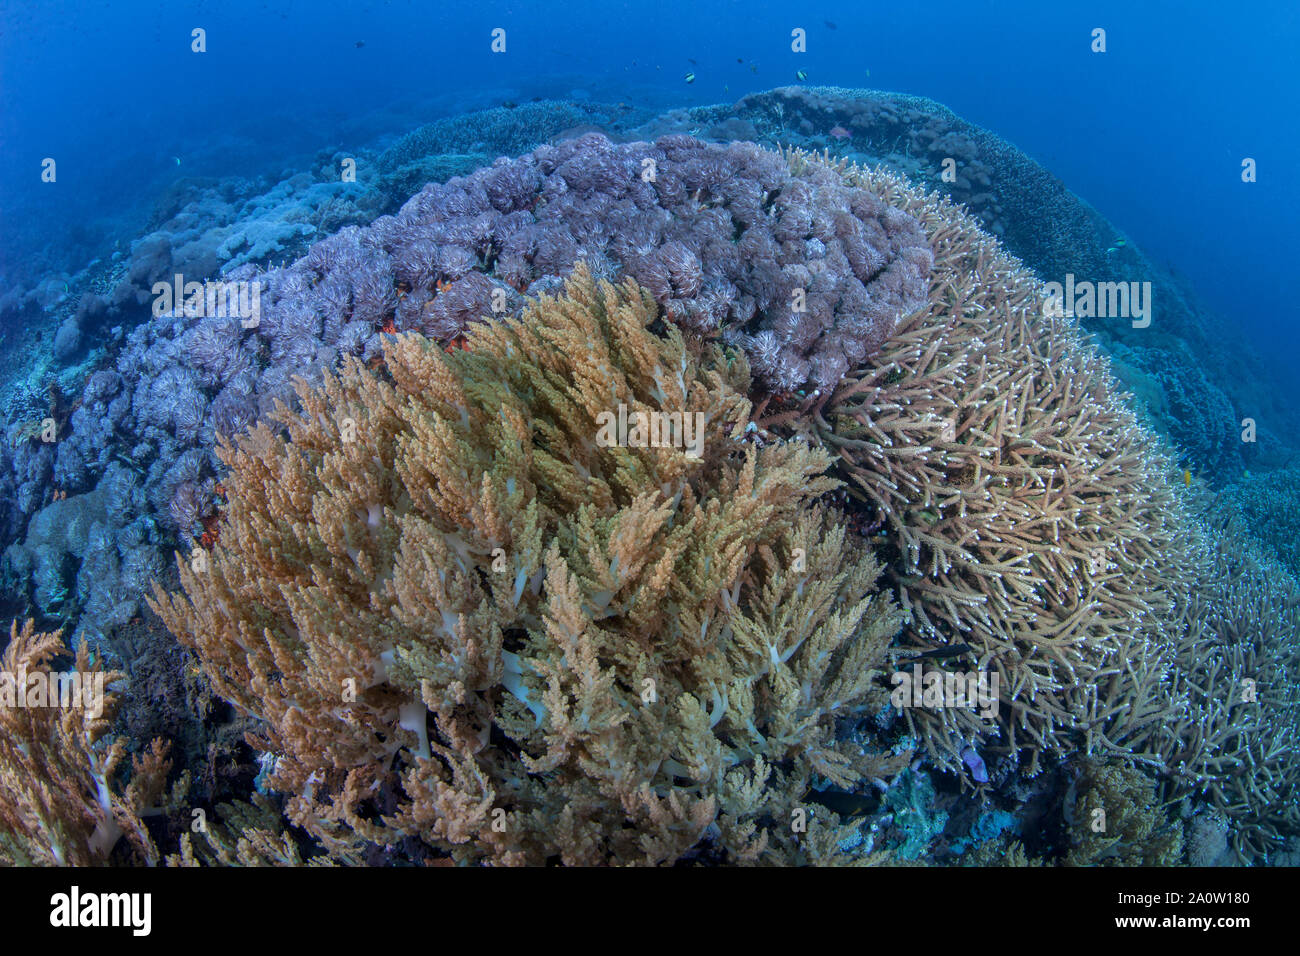 Healthy colorful coral garden with soft and hard corals in Nusa Lambongan, Bali, Indonesia. Stock Photo